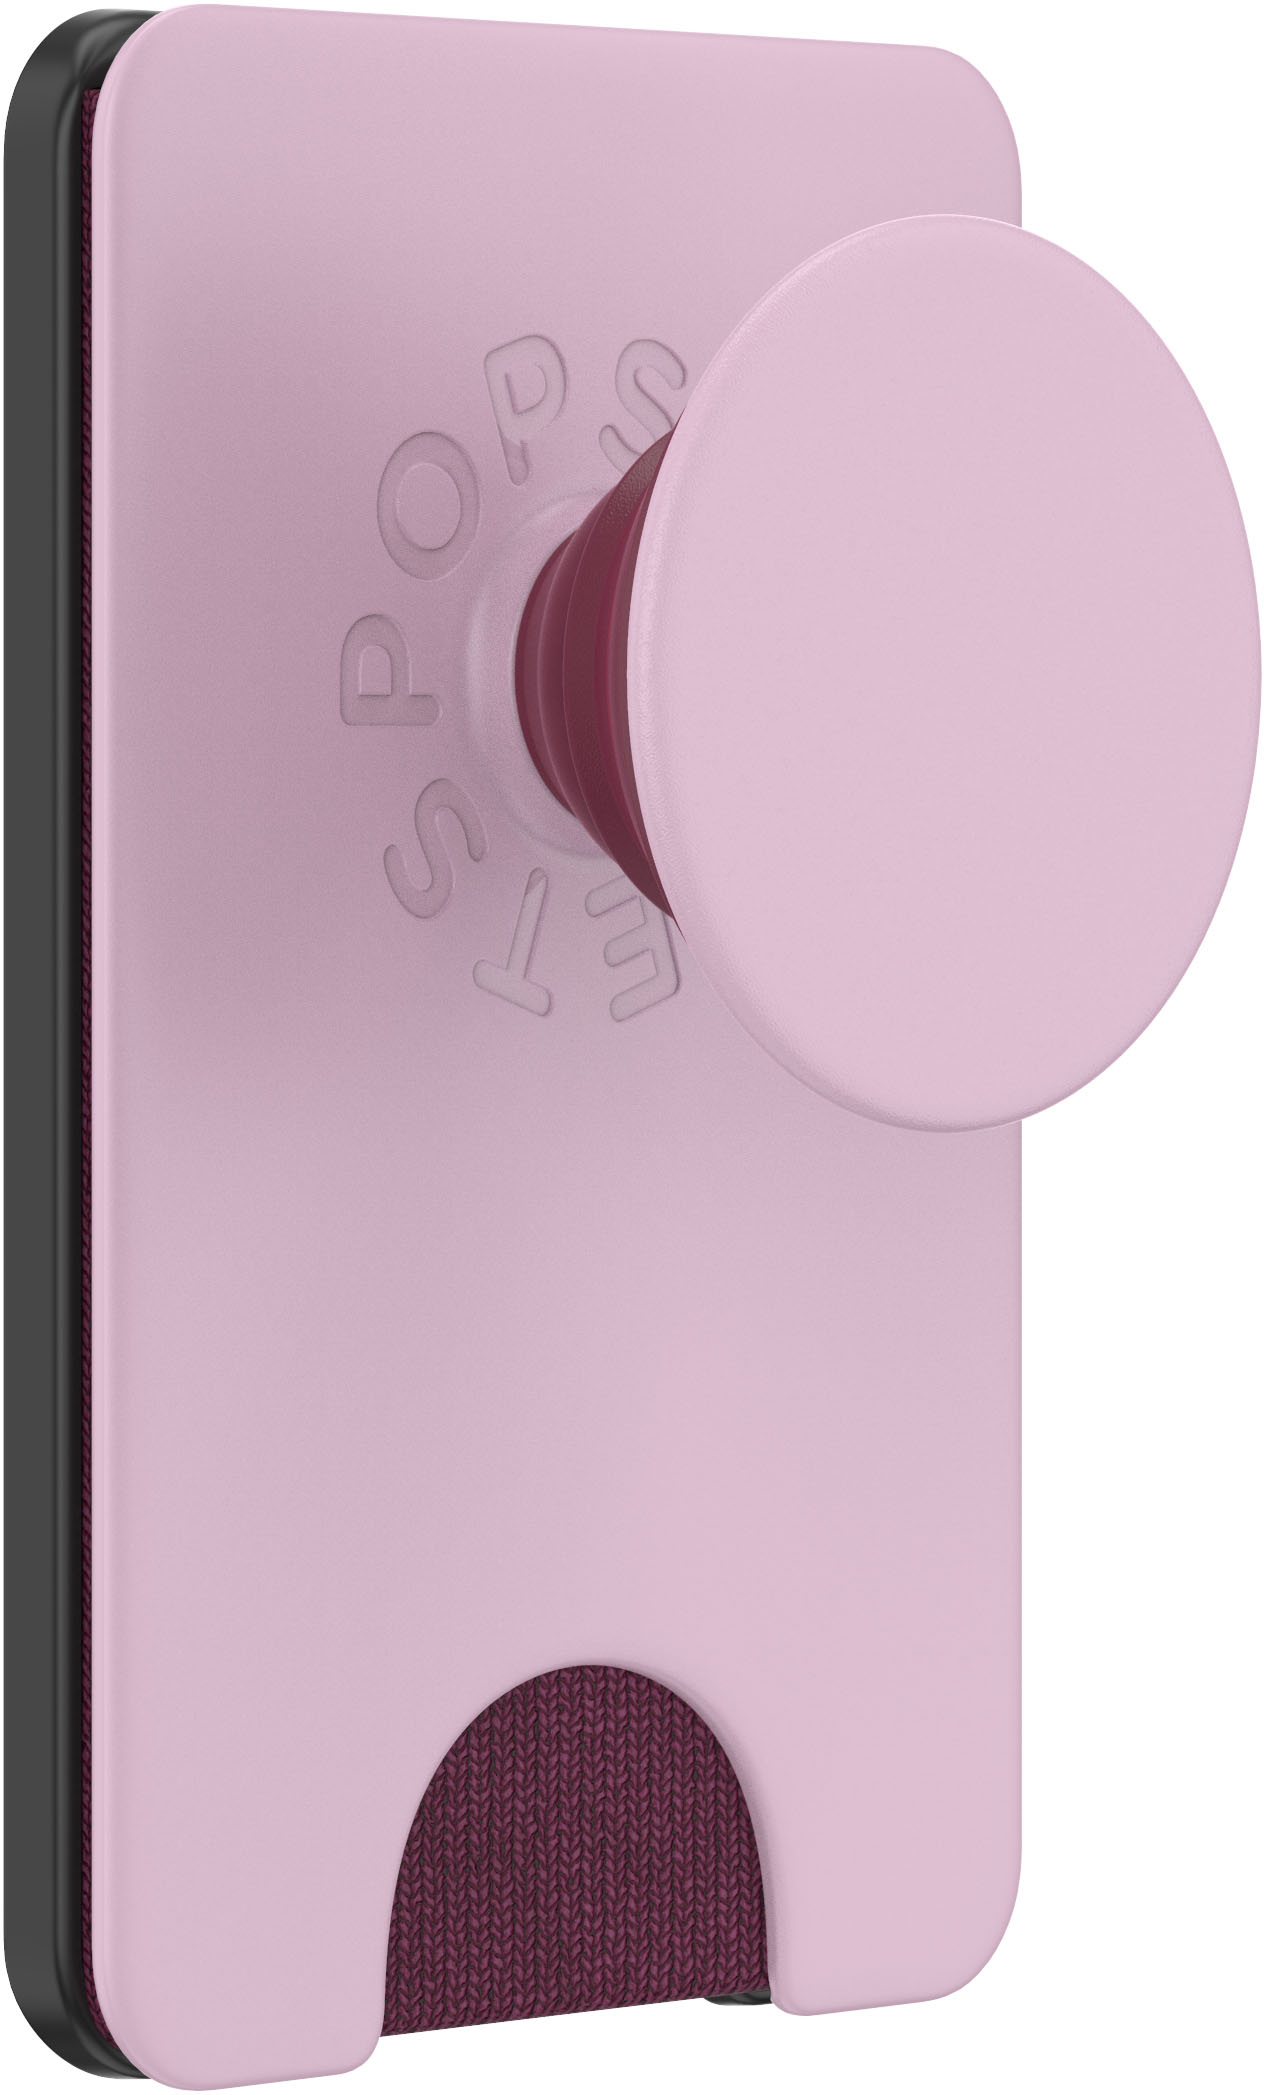 PopSockets launches iPhone grip with built-in battery